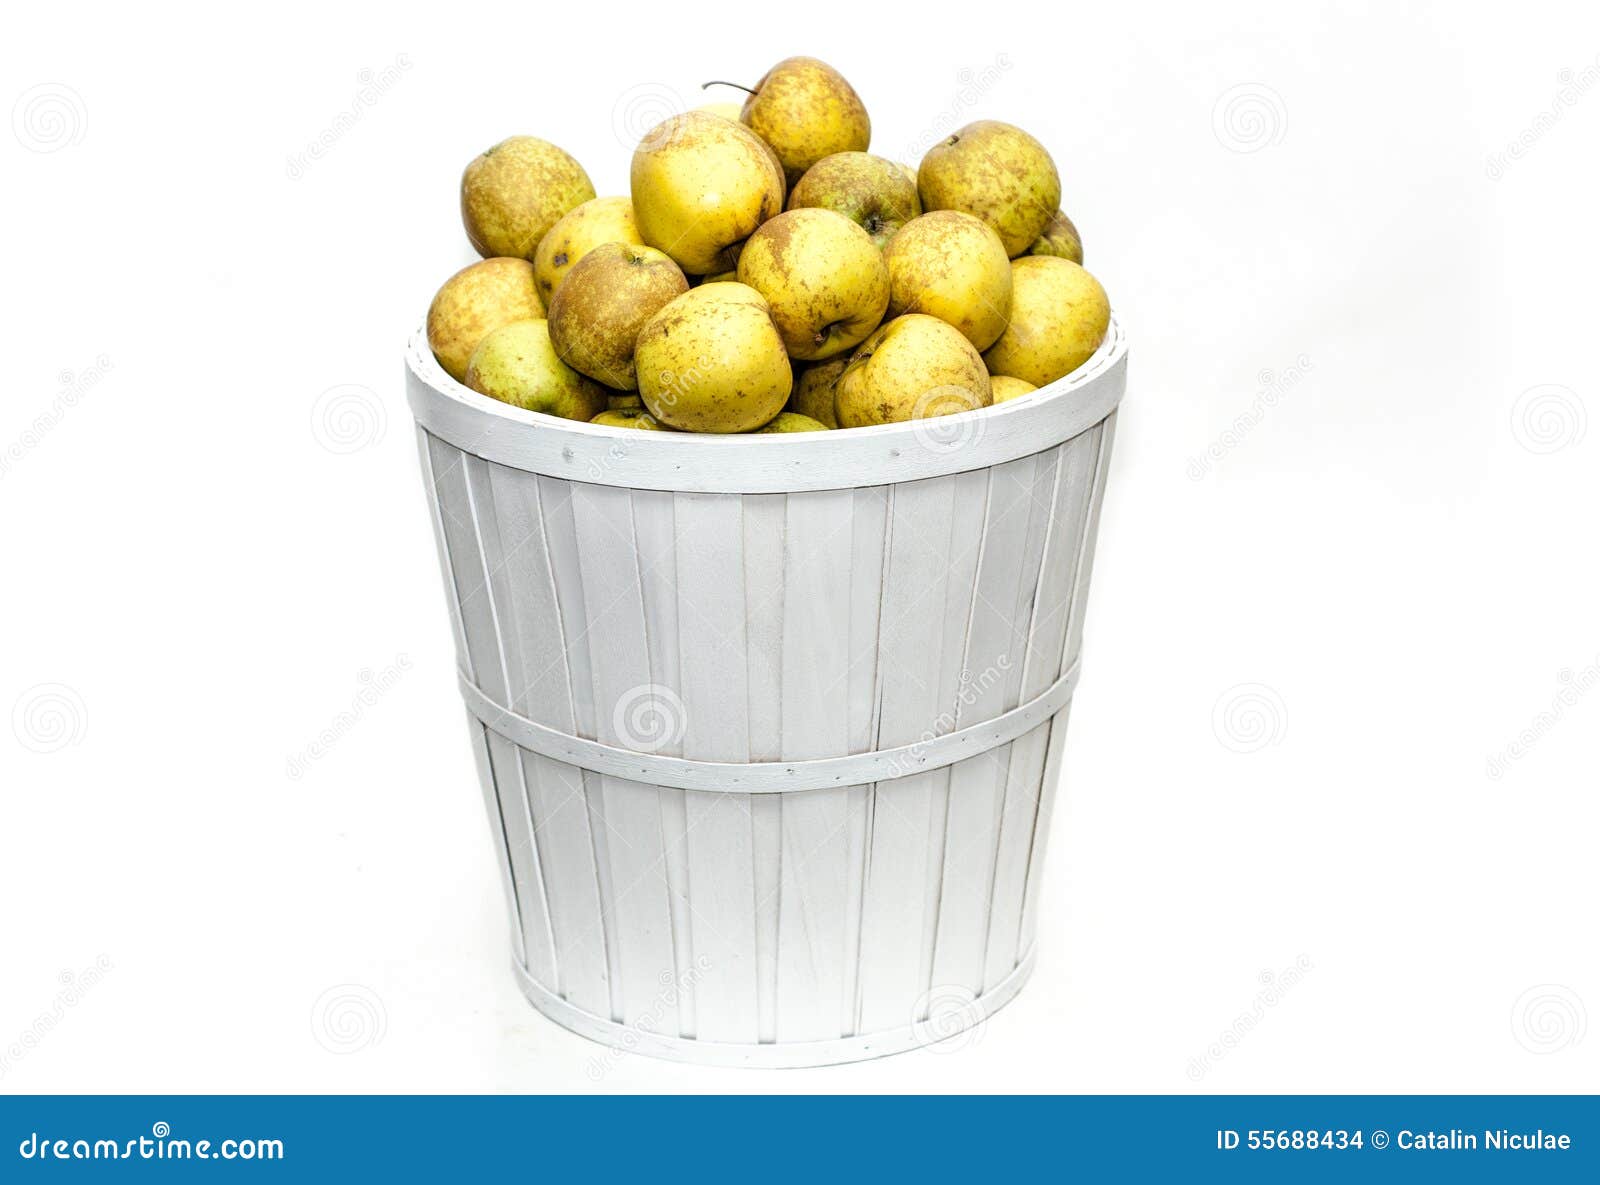 Yellow apples in a white basket